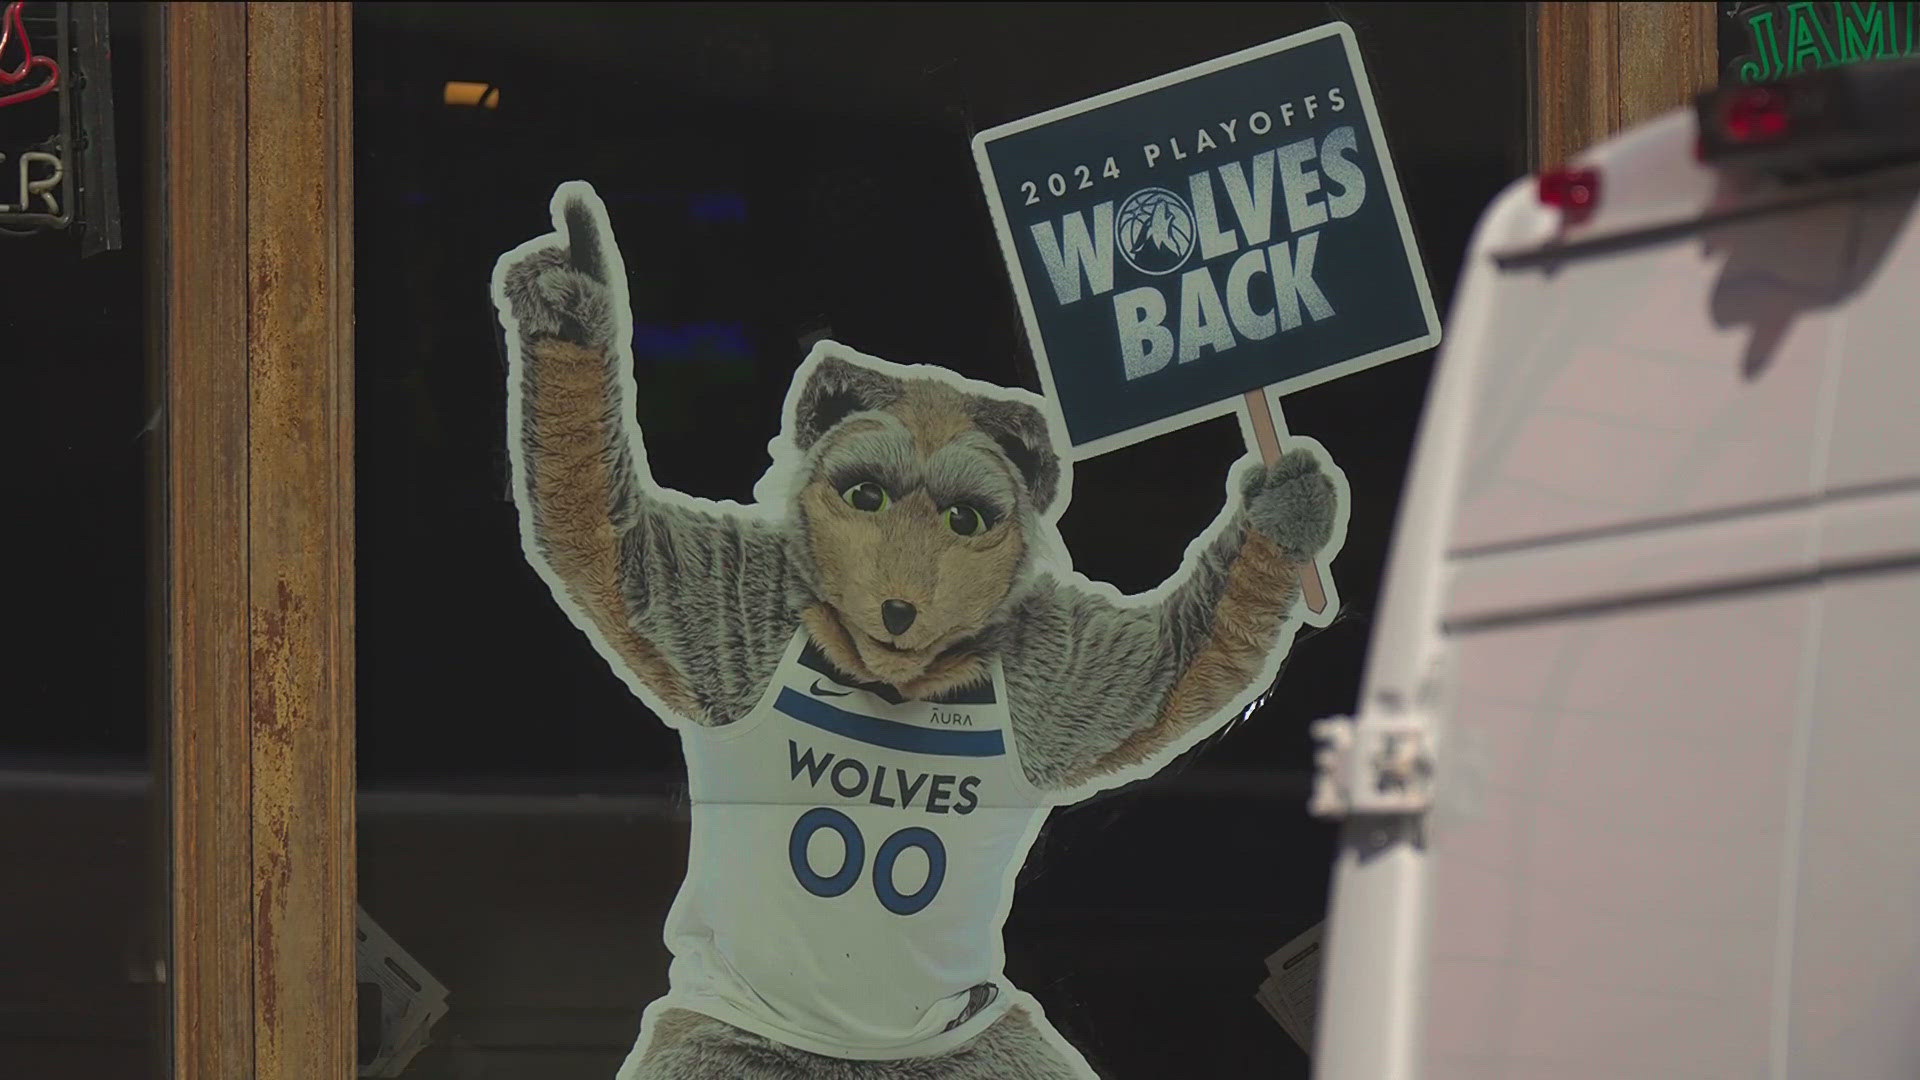 The event will have pregame entertainment, a huge T-V, a chick-fil-a food truck, a mobile bar, and wolves merch for sale.